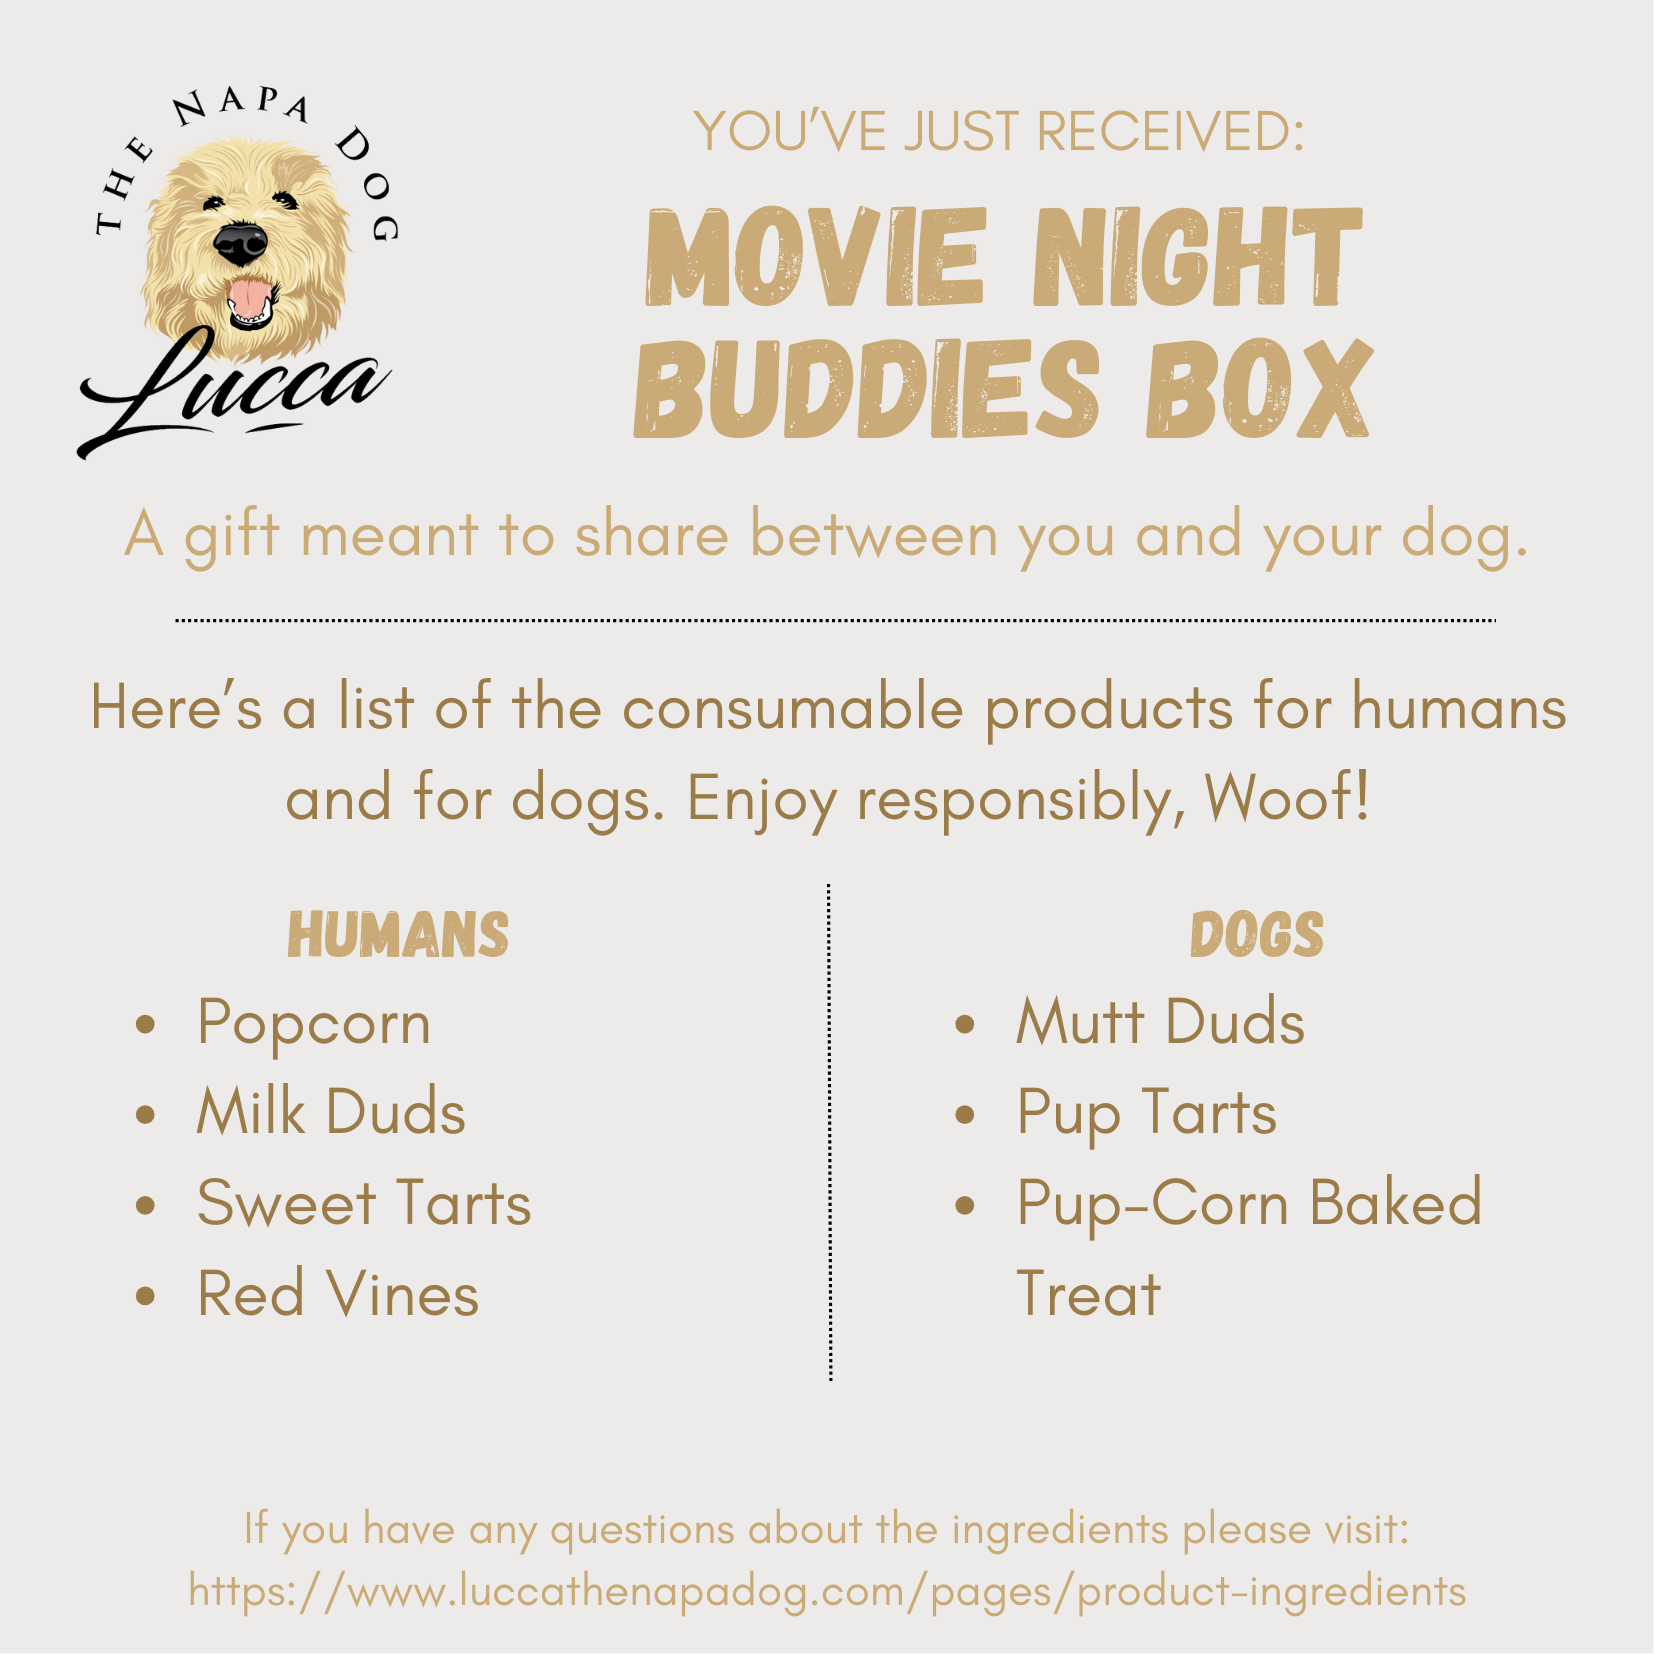 ingredient insert card information on pup-corn and movie night buddies by lucca gift box